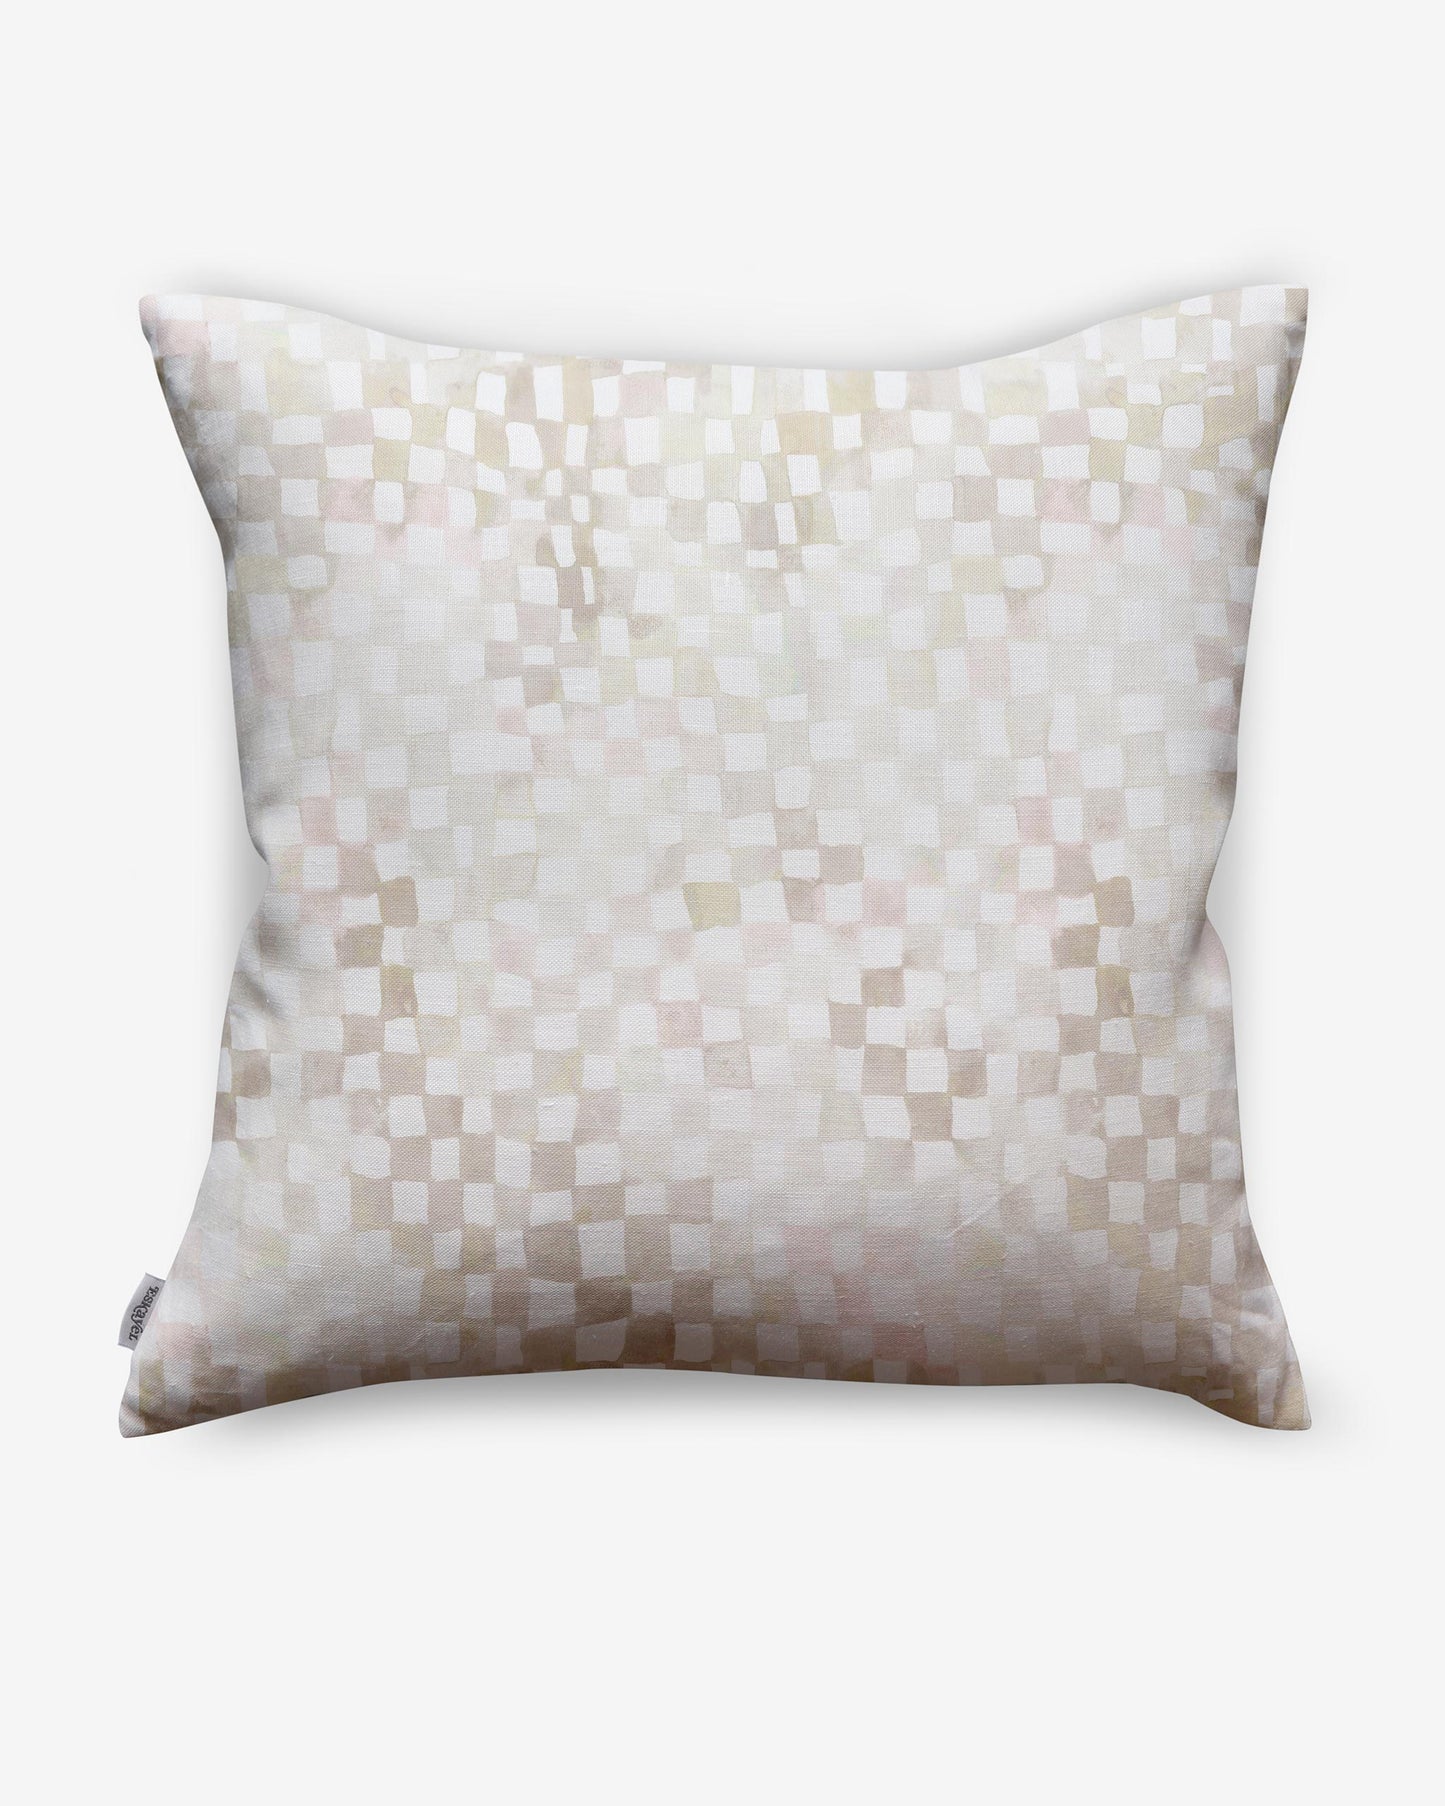 A white and checkerboard patterned Chess Pillow on a white background.